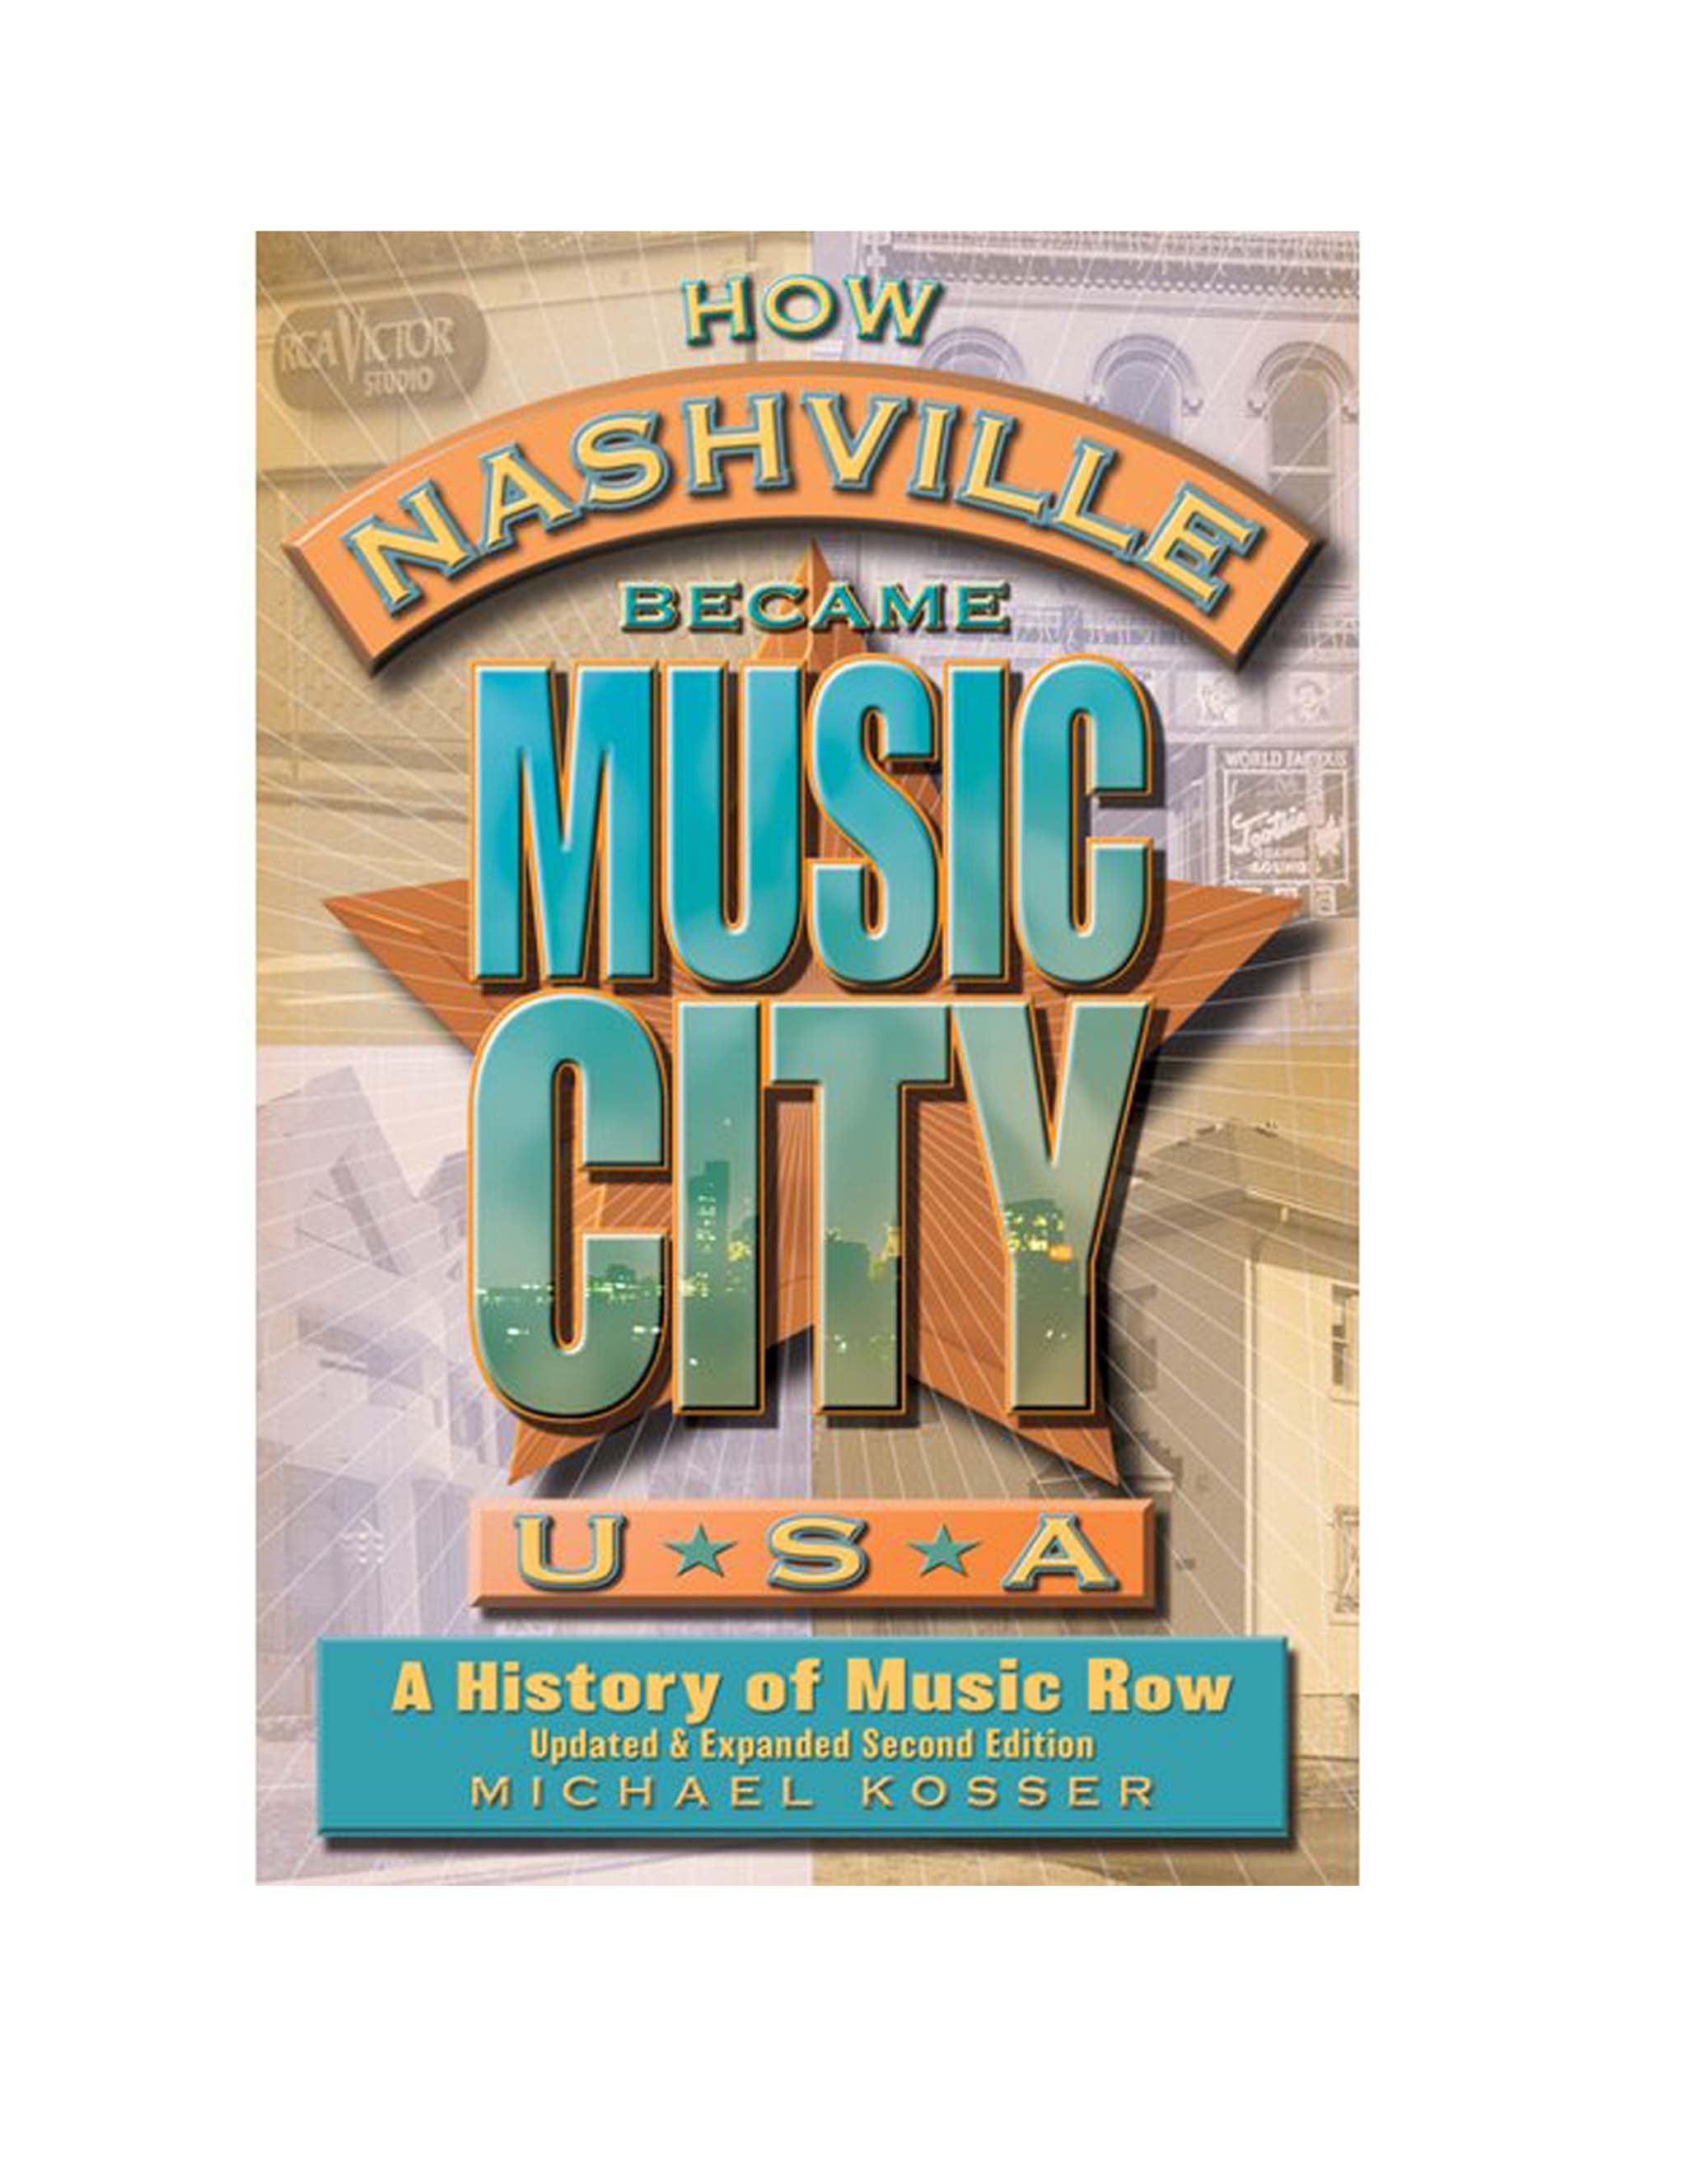 How Nashville Became Music City, U.S.A.: A History of Music Row (Paperback)